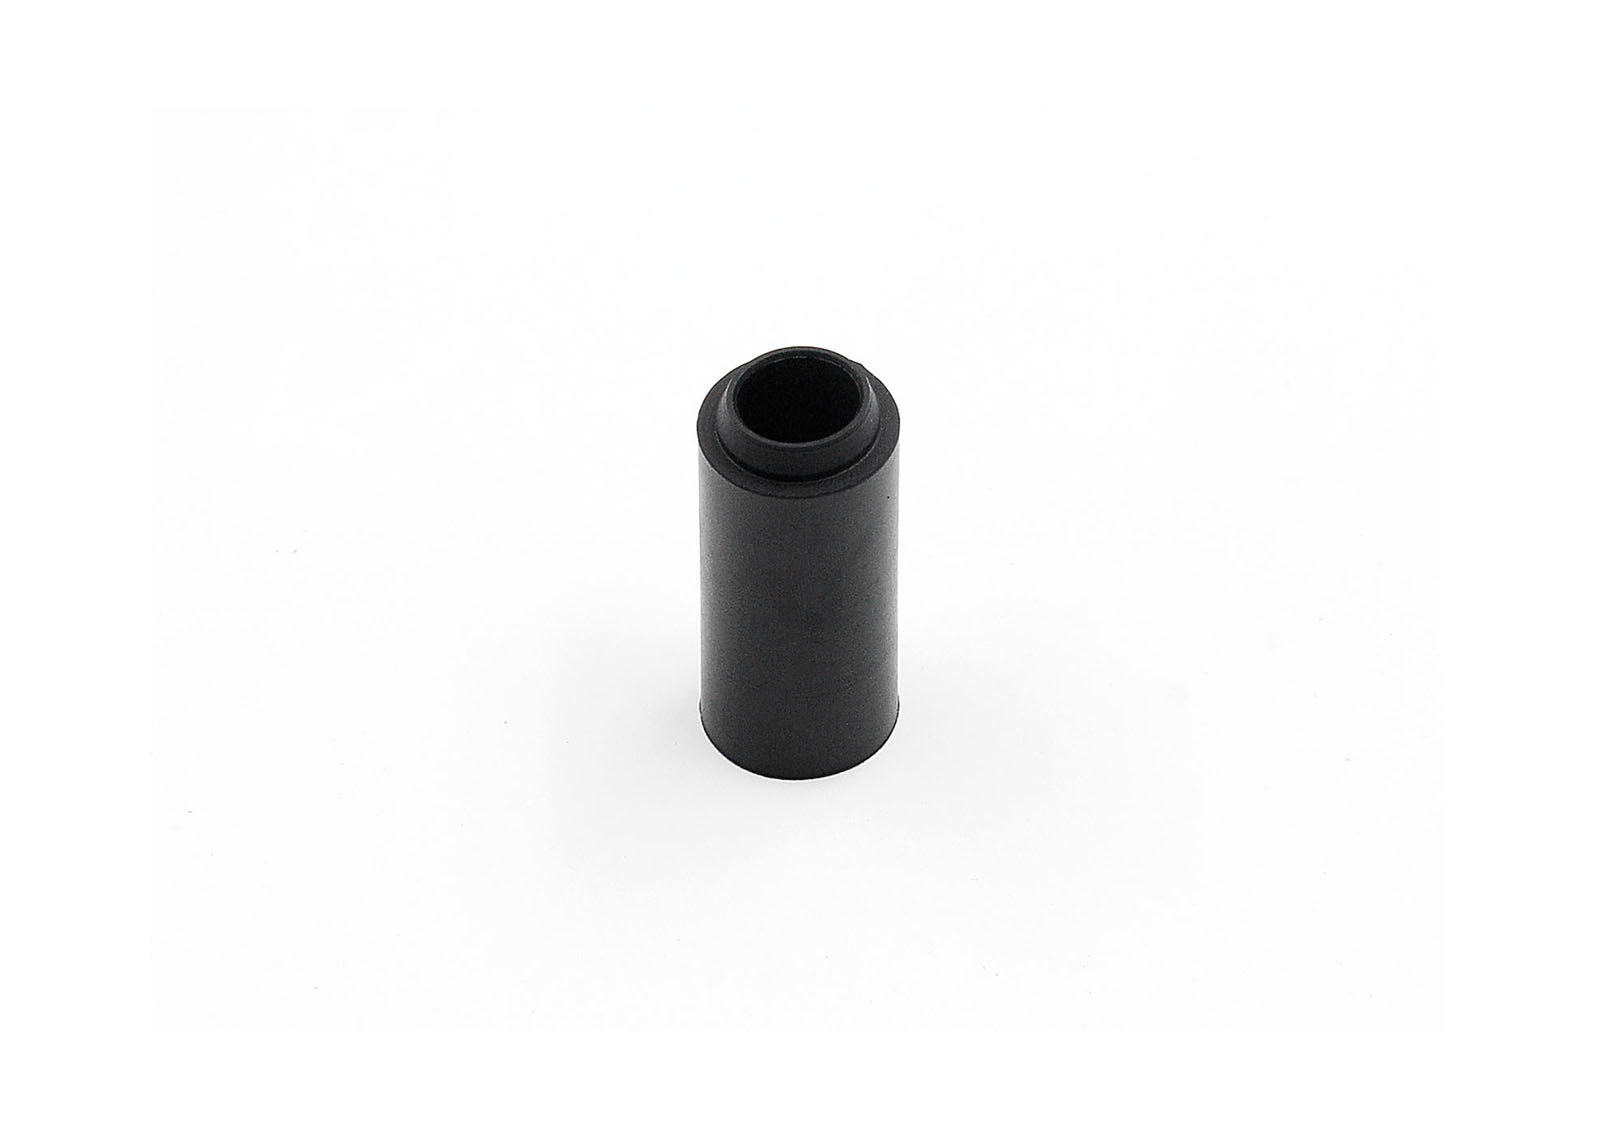 Professional 2 Ring, Hop Up Bucking for Modify Hybrid Inner Barrel - Modify Airsoft parts